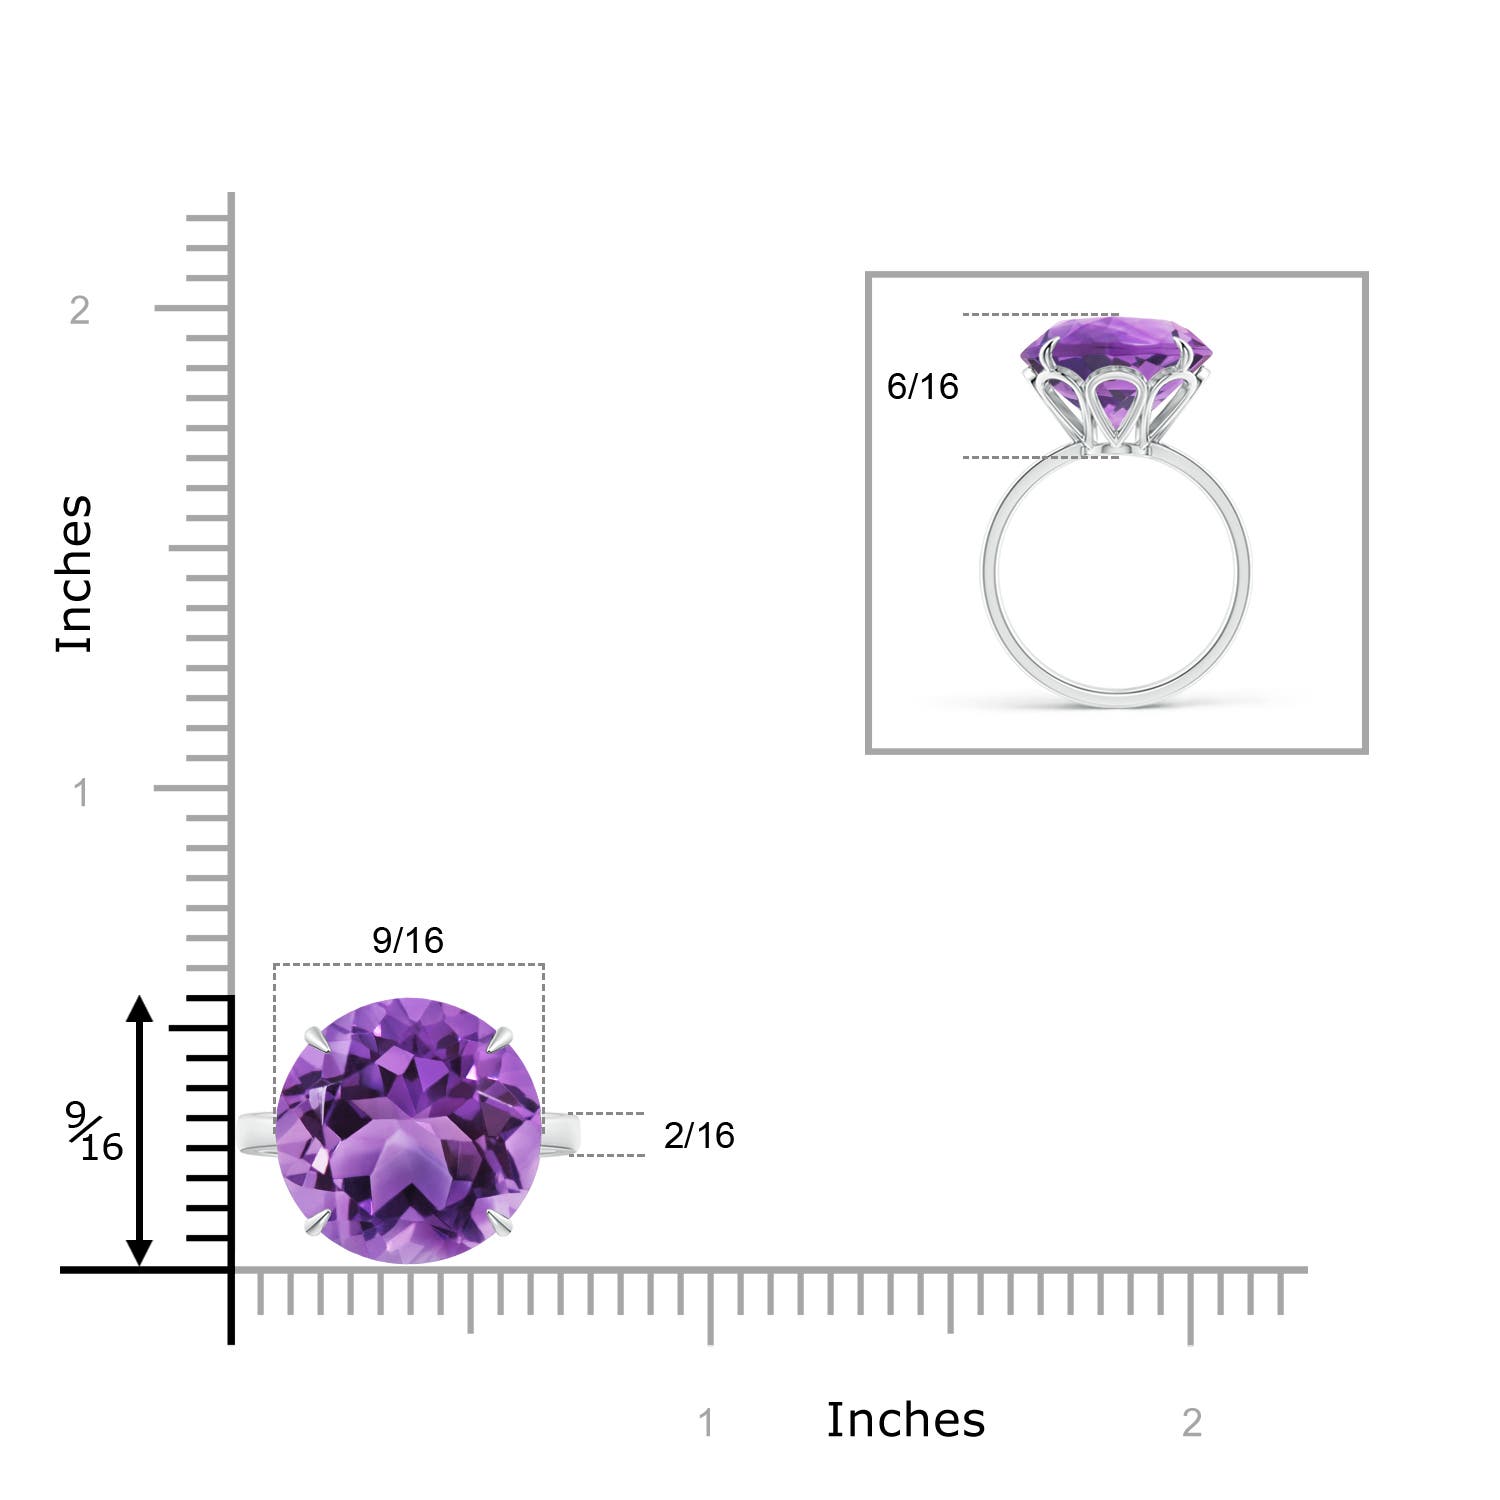 AA - Amethyst / 8.5 CT / 14 KT White Gold